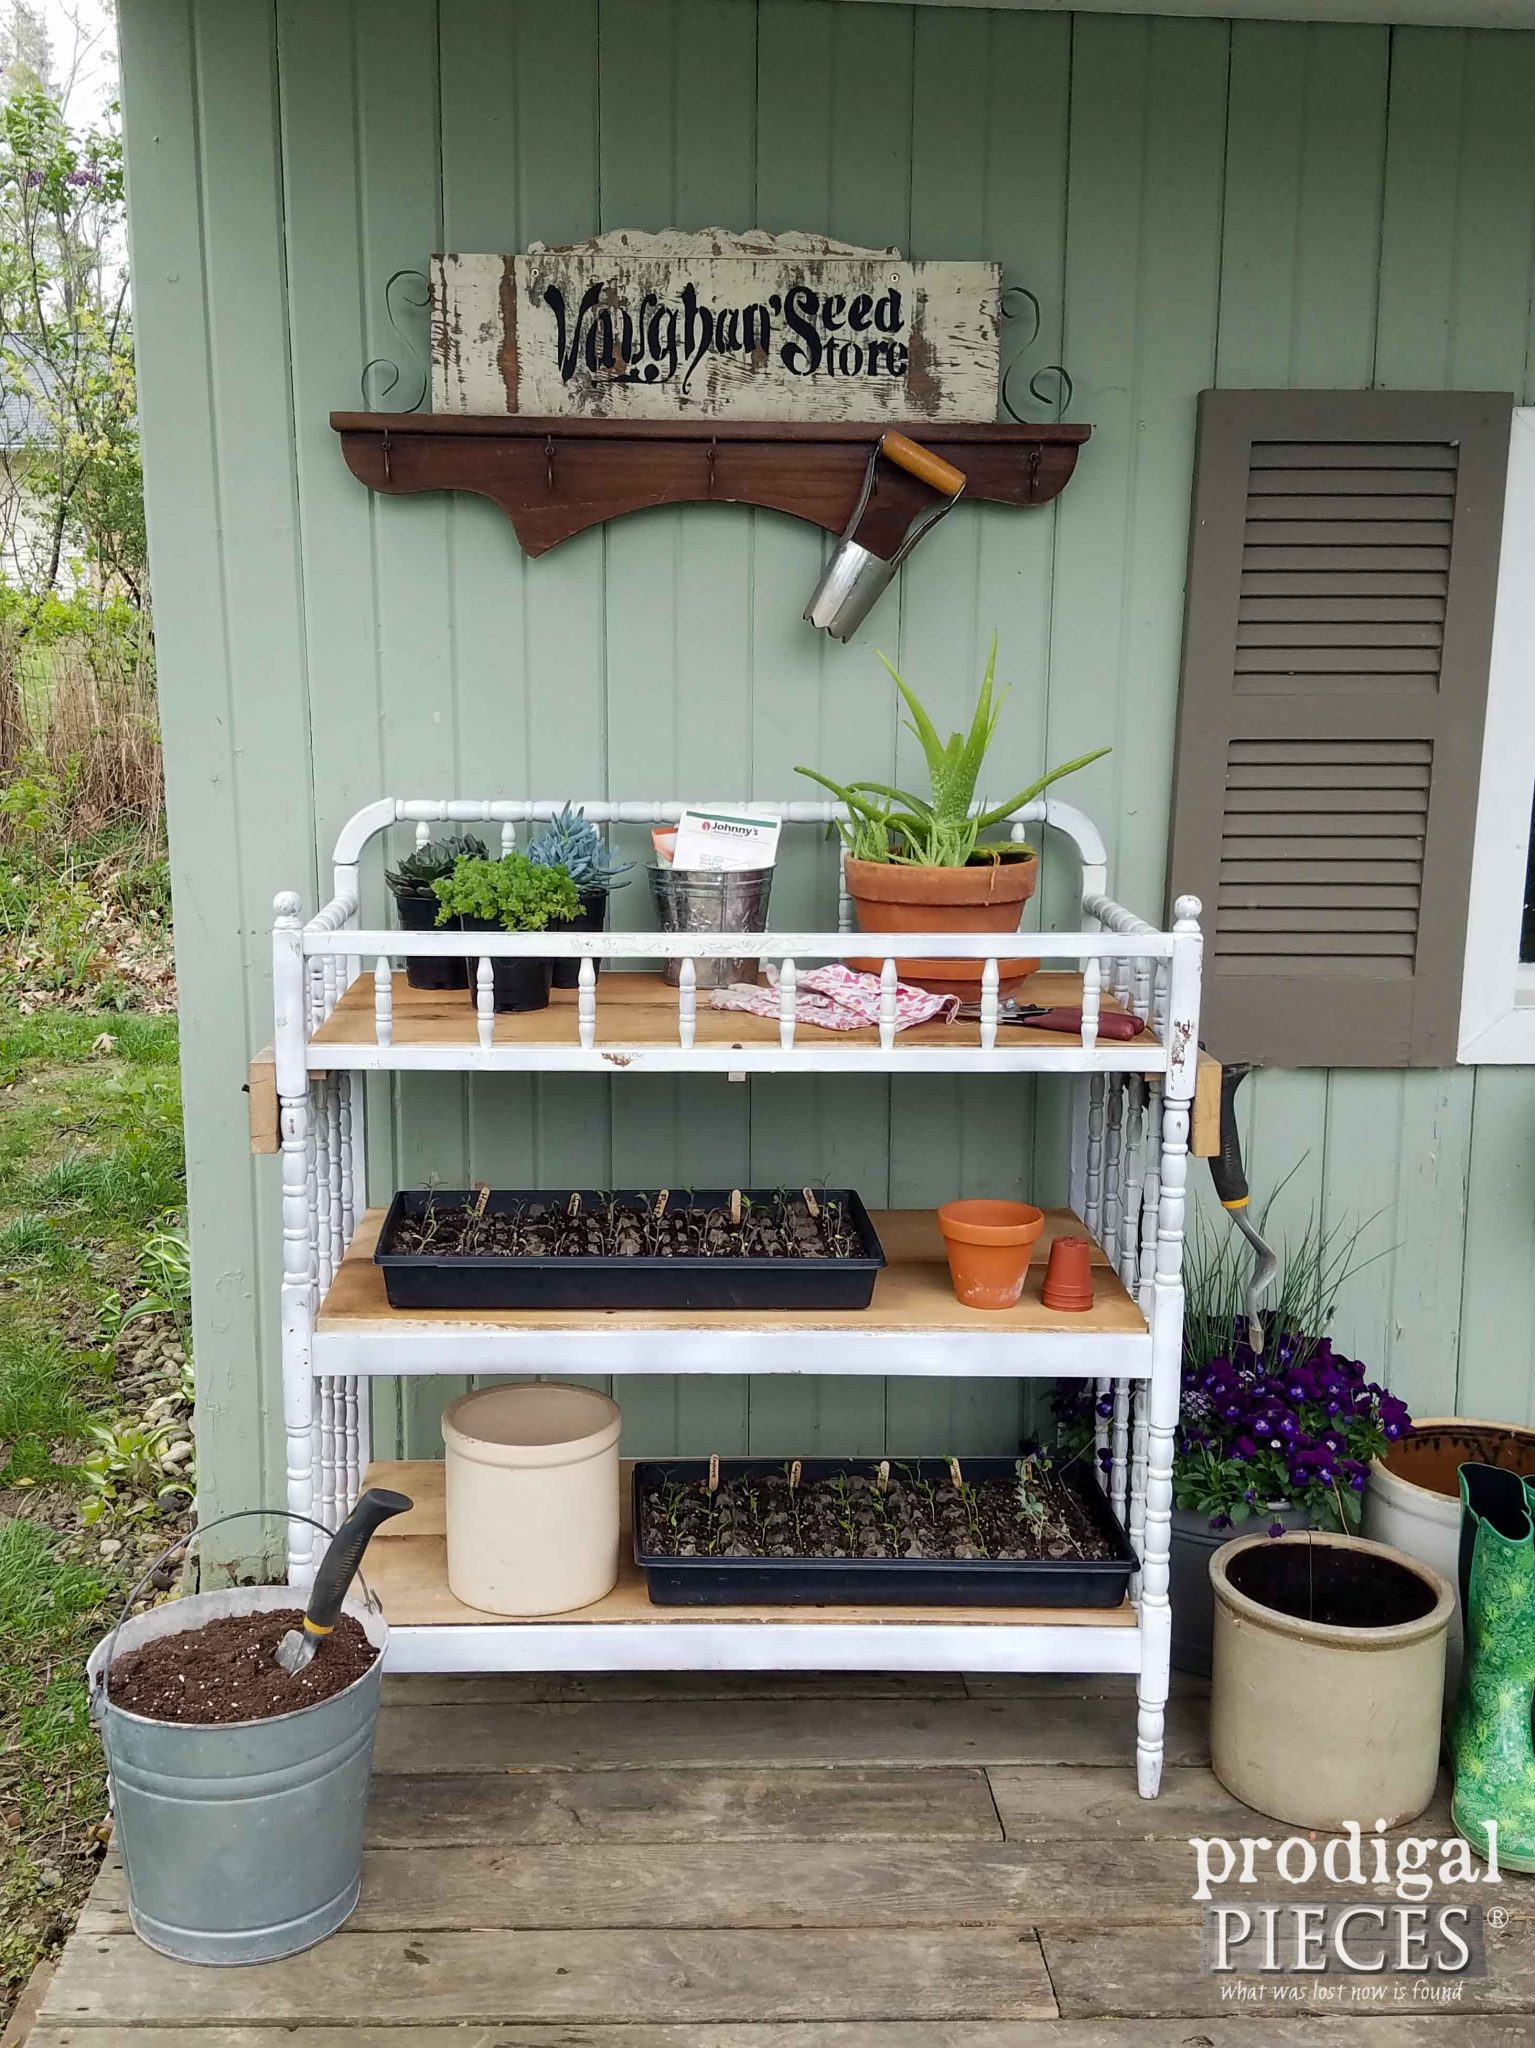 Garden Shed with Upcyled Potting Bench made by Prodigal Pieces | prodigalpieces.com